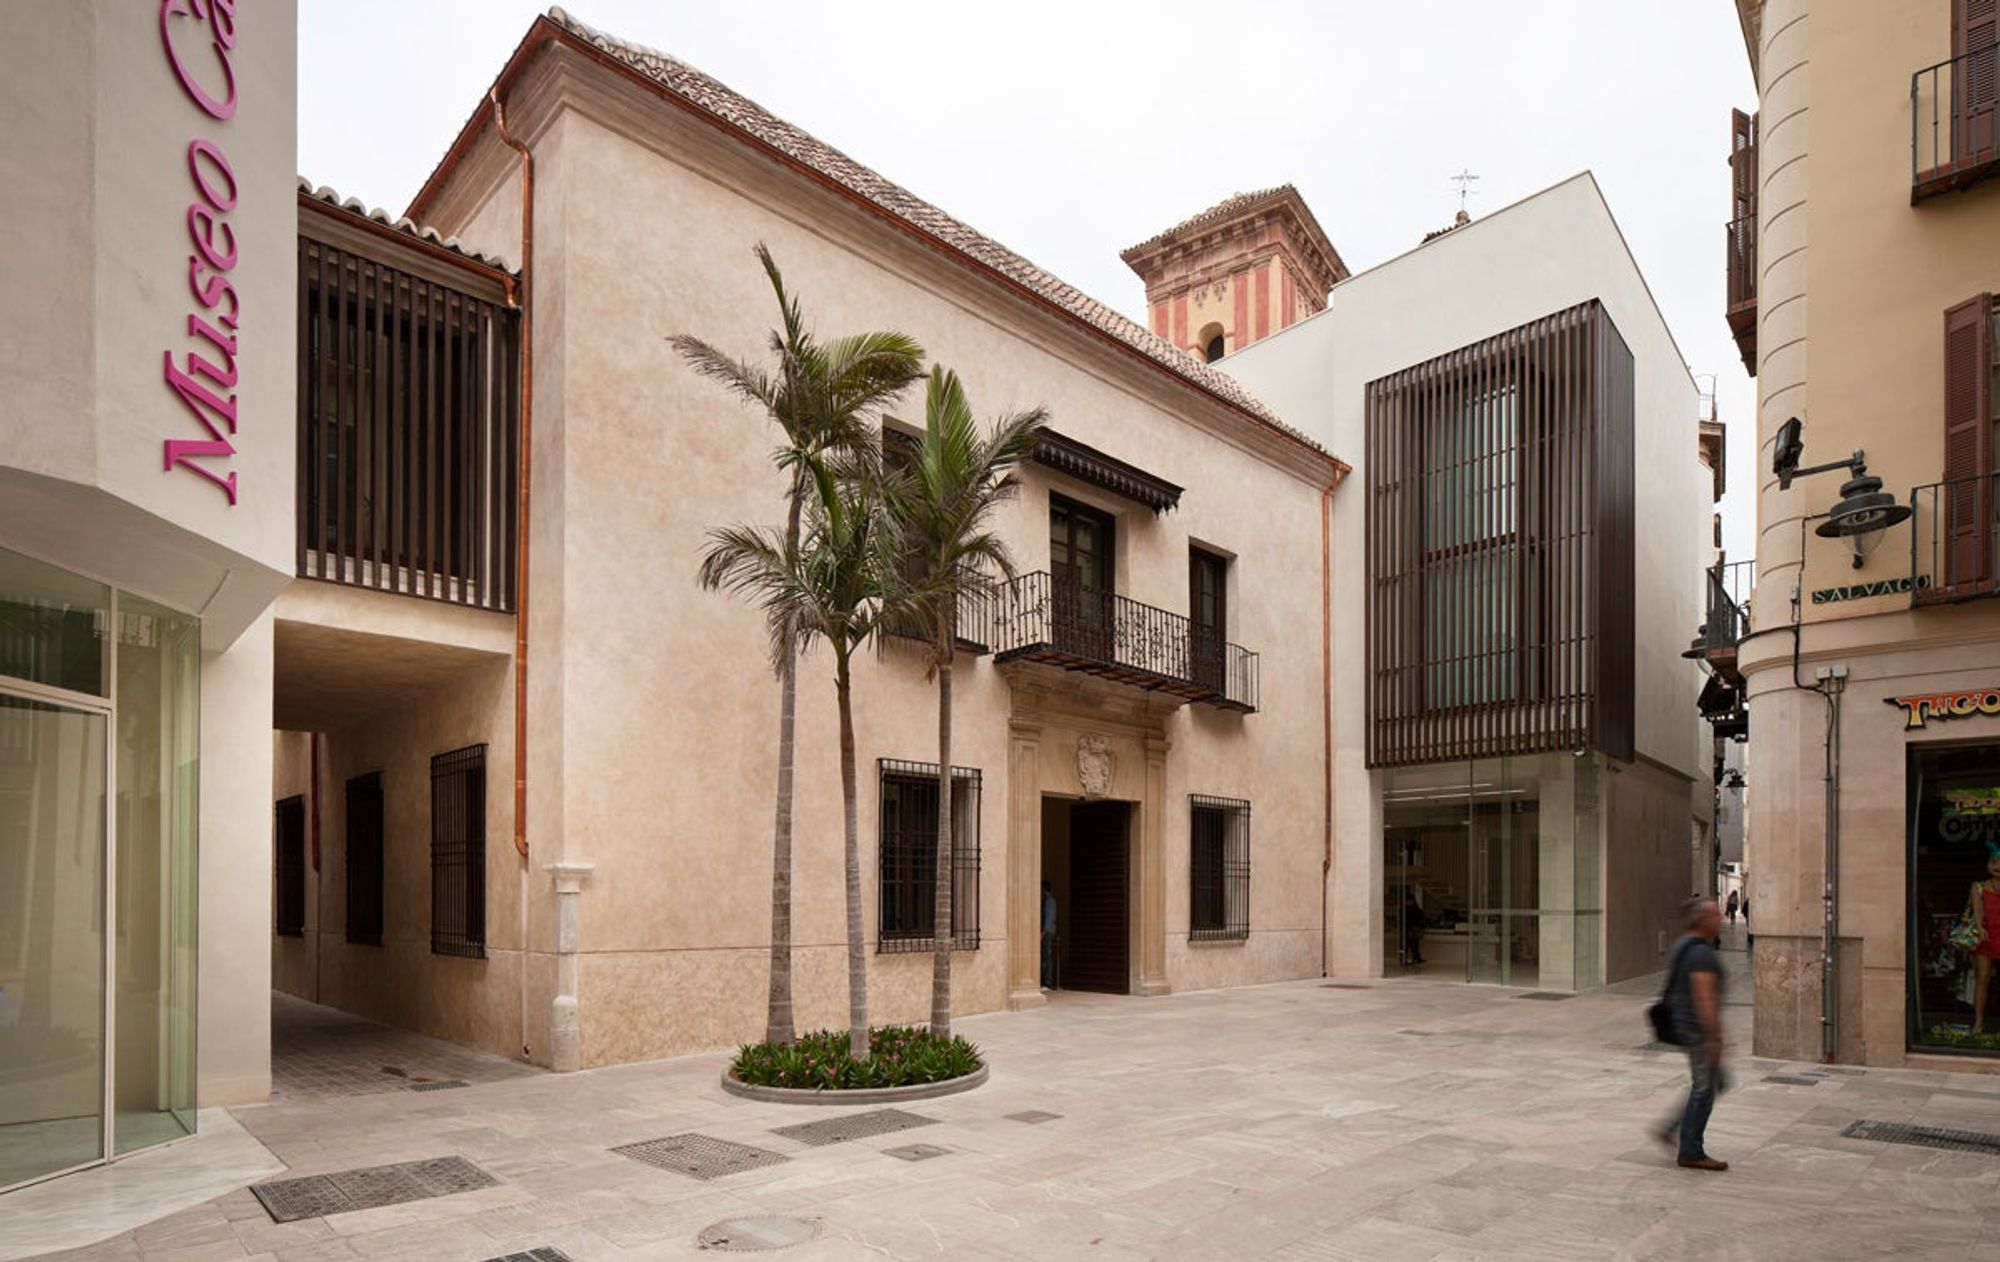 Museums, another attraction for solo travellers in Malaga